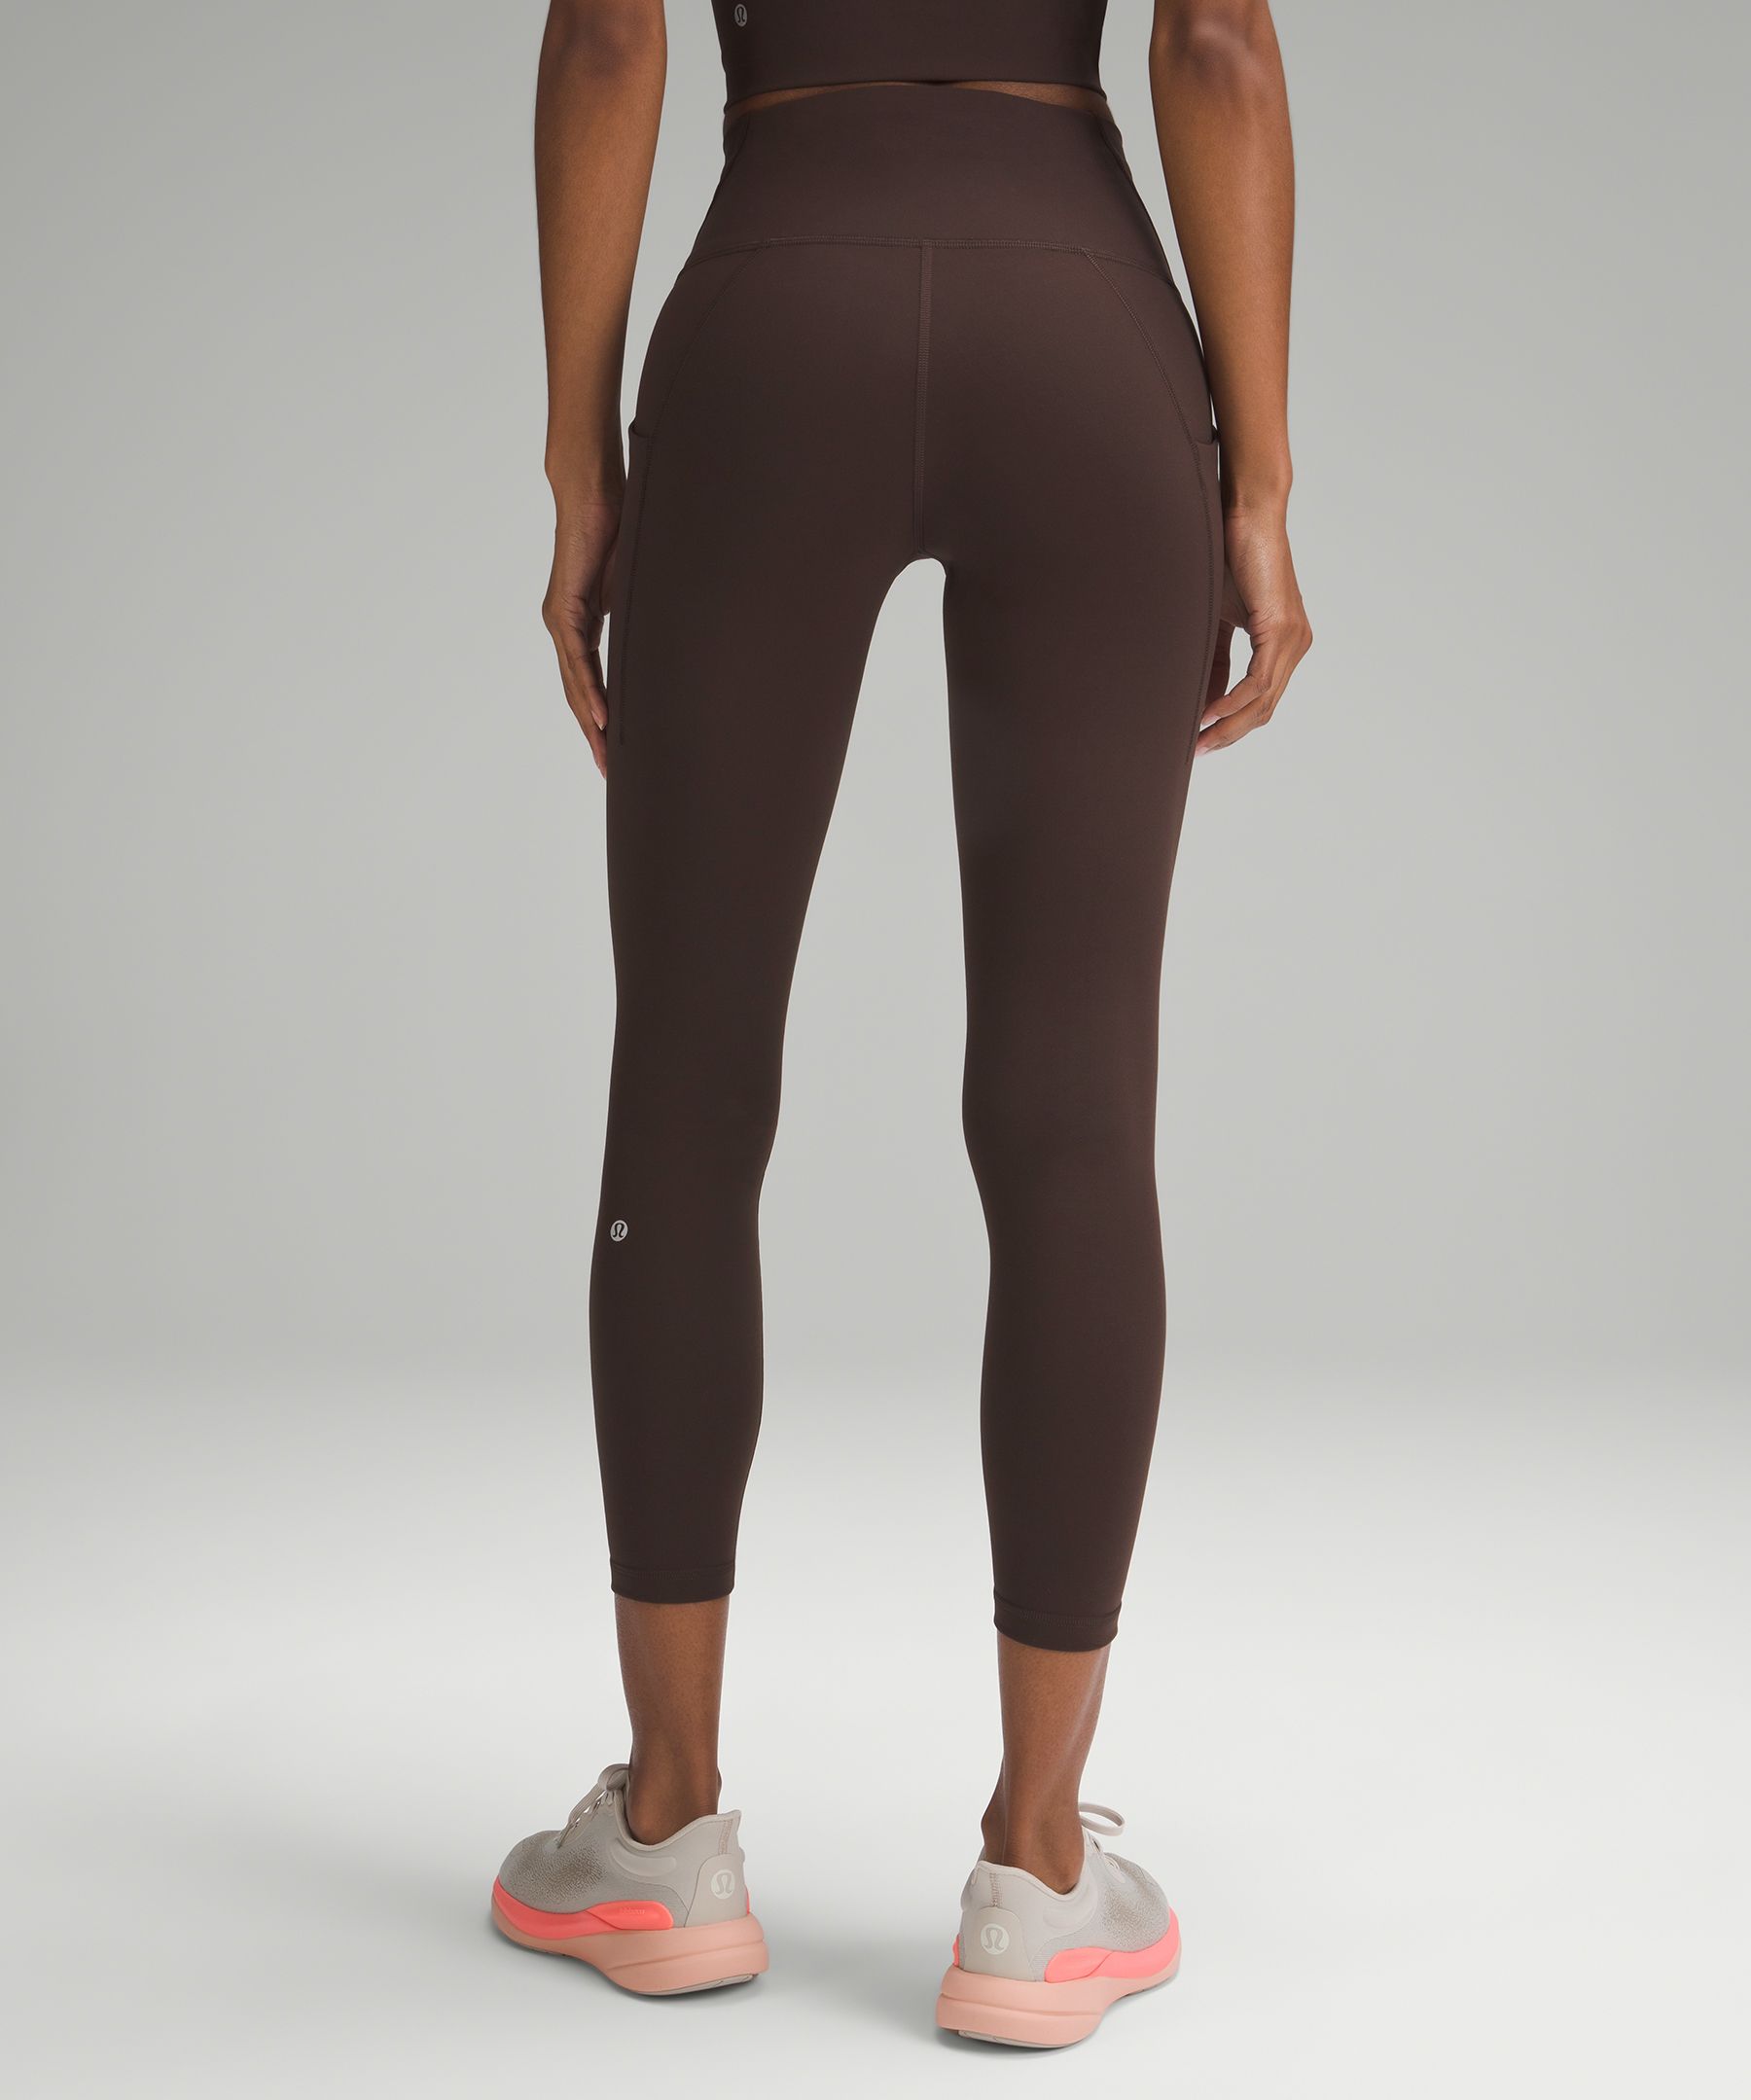 NEW LULULEMON LEGGING TRY ON REVIEW / WUNDER TRAIN HIGH RISE TIGHT WITH  POCKETS HAUL 